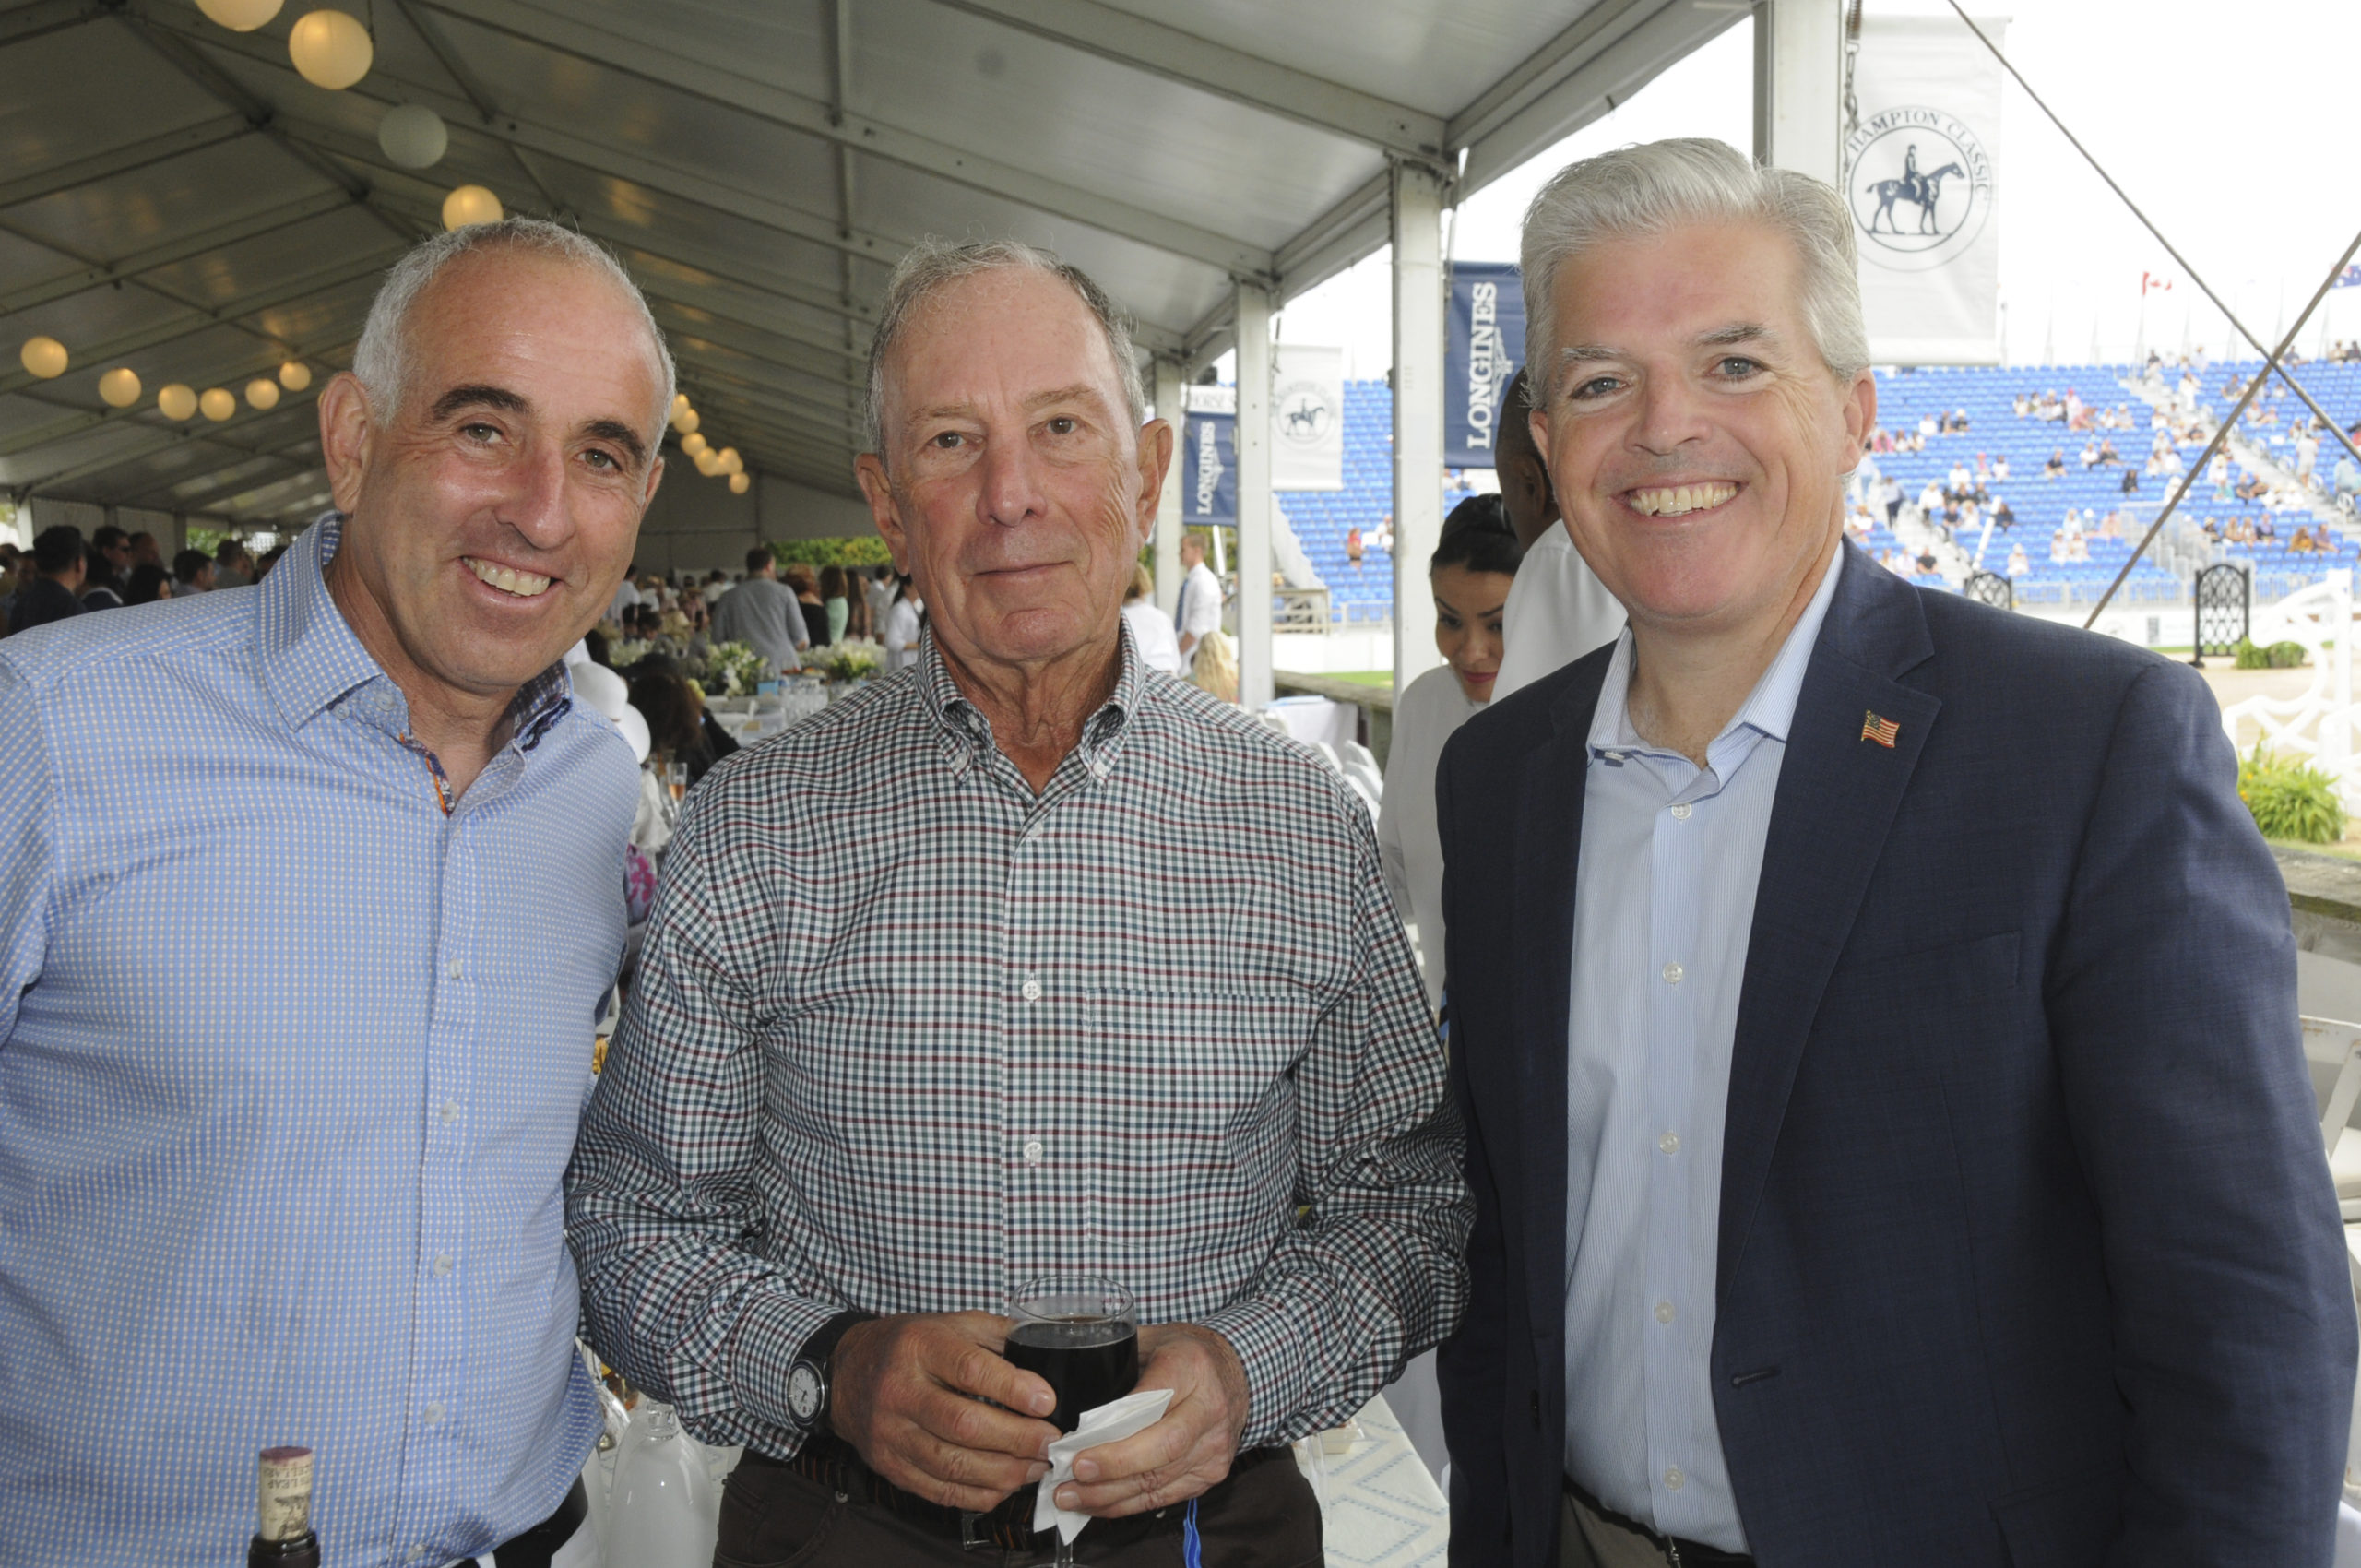 Jay Schneiderman, Michael Bloomberg and Steve Bellone in the tent at the Hampton Classic Grand Prix on Sunday afternoon.   RICHARD LEWIN